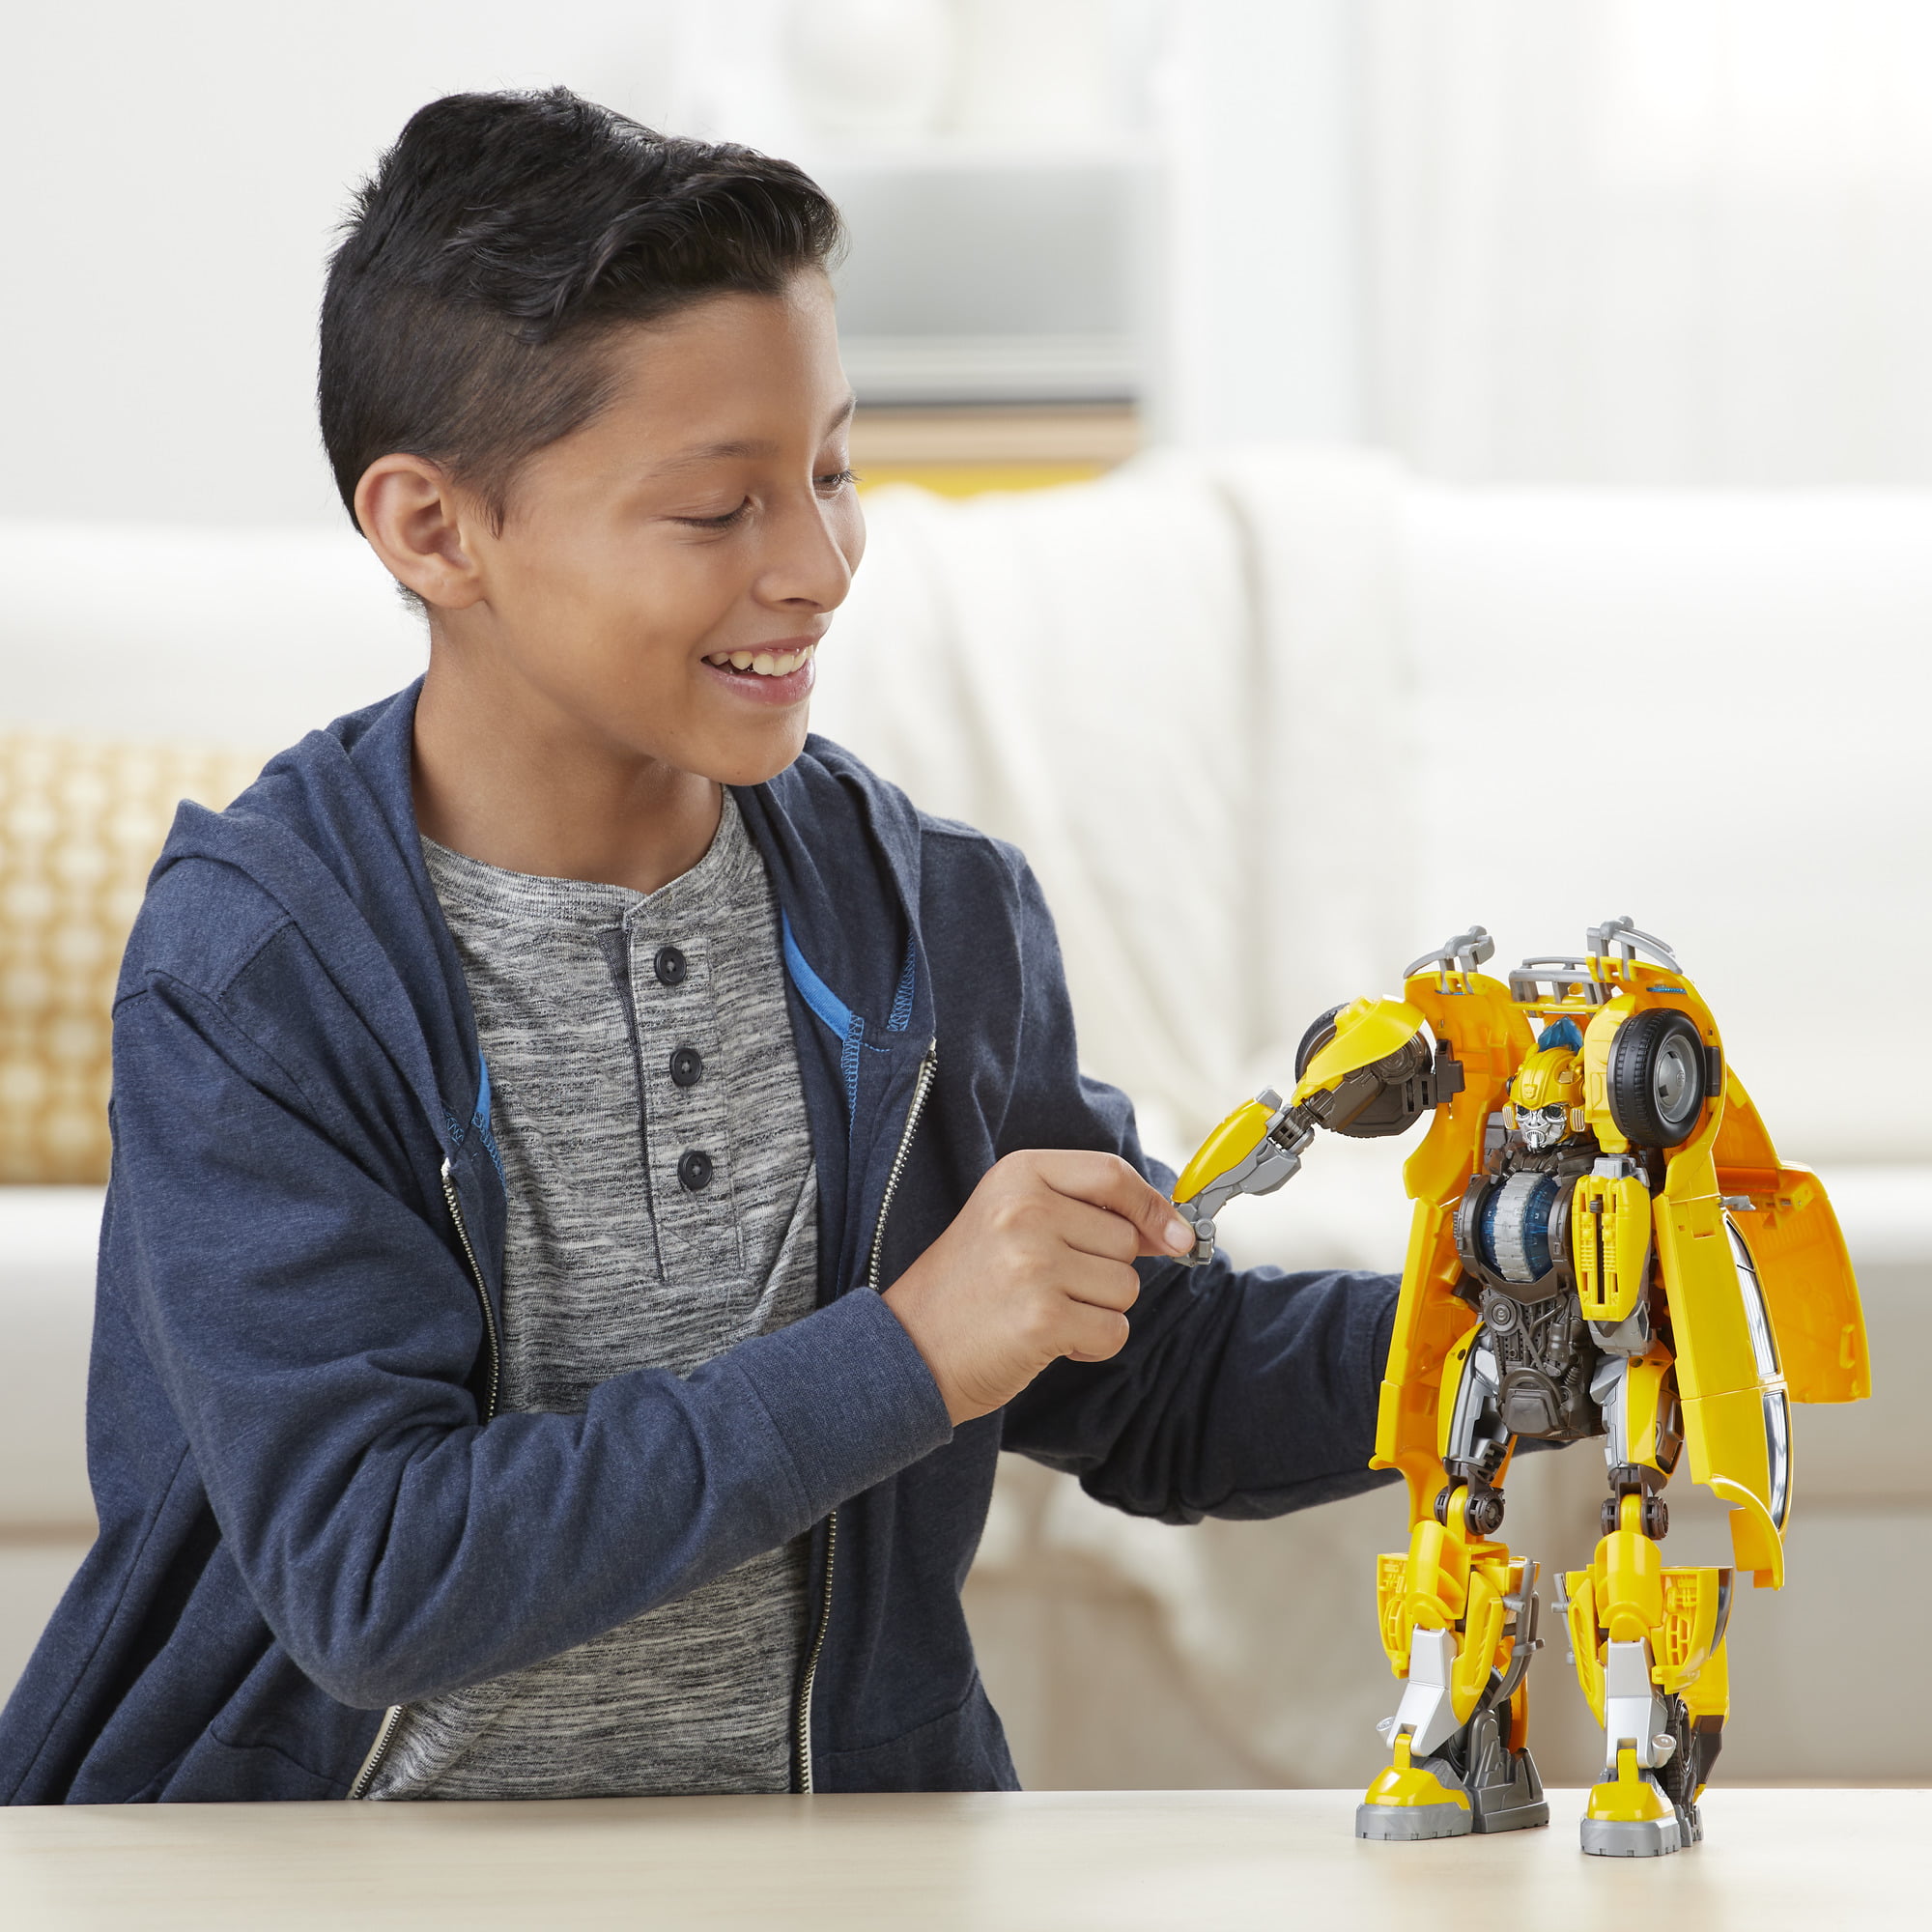 transformers bumblebee power charge bumblebee action figure